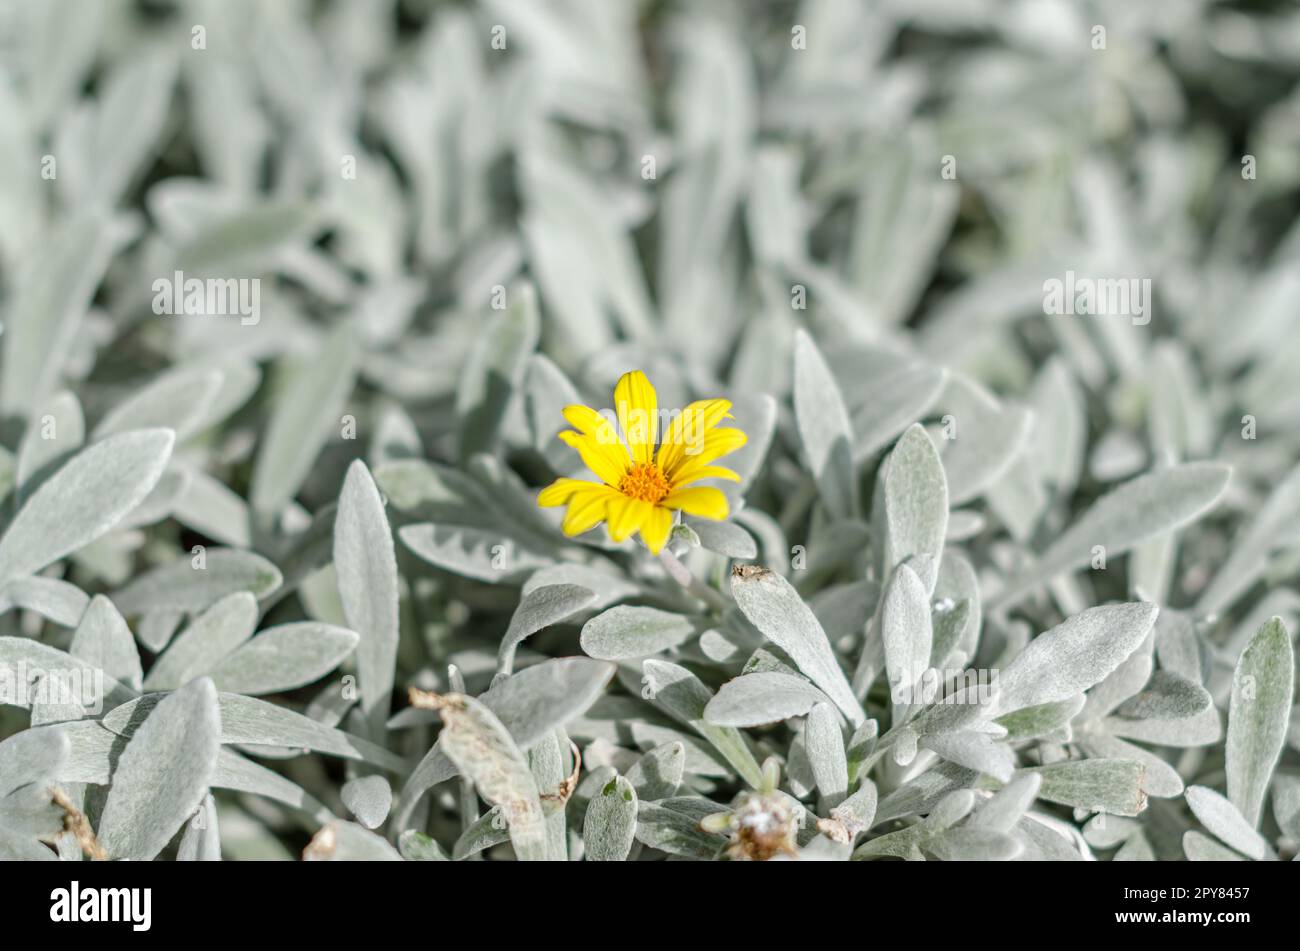 Yellow flower with silver leaves Stock Photo